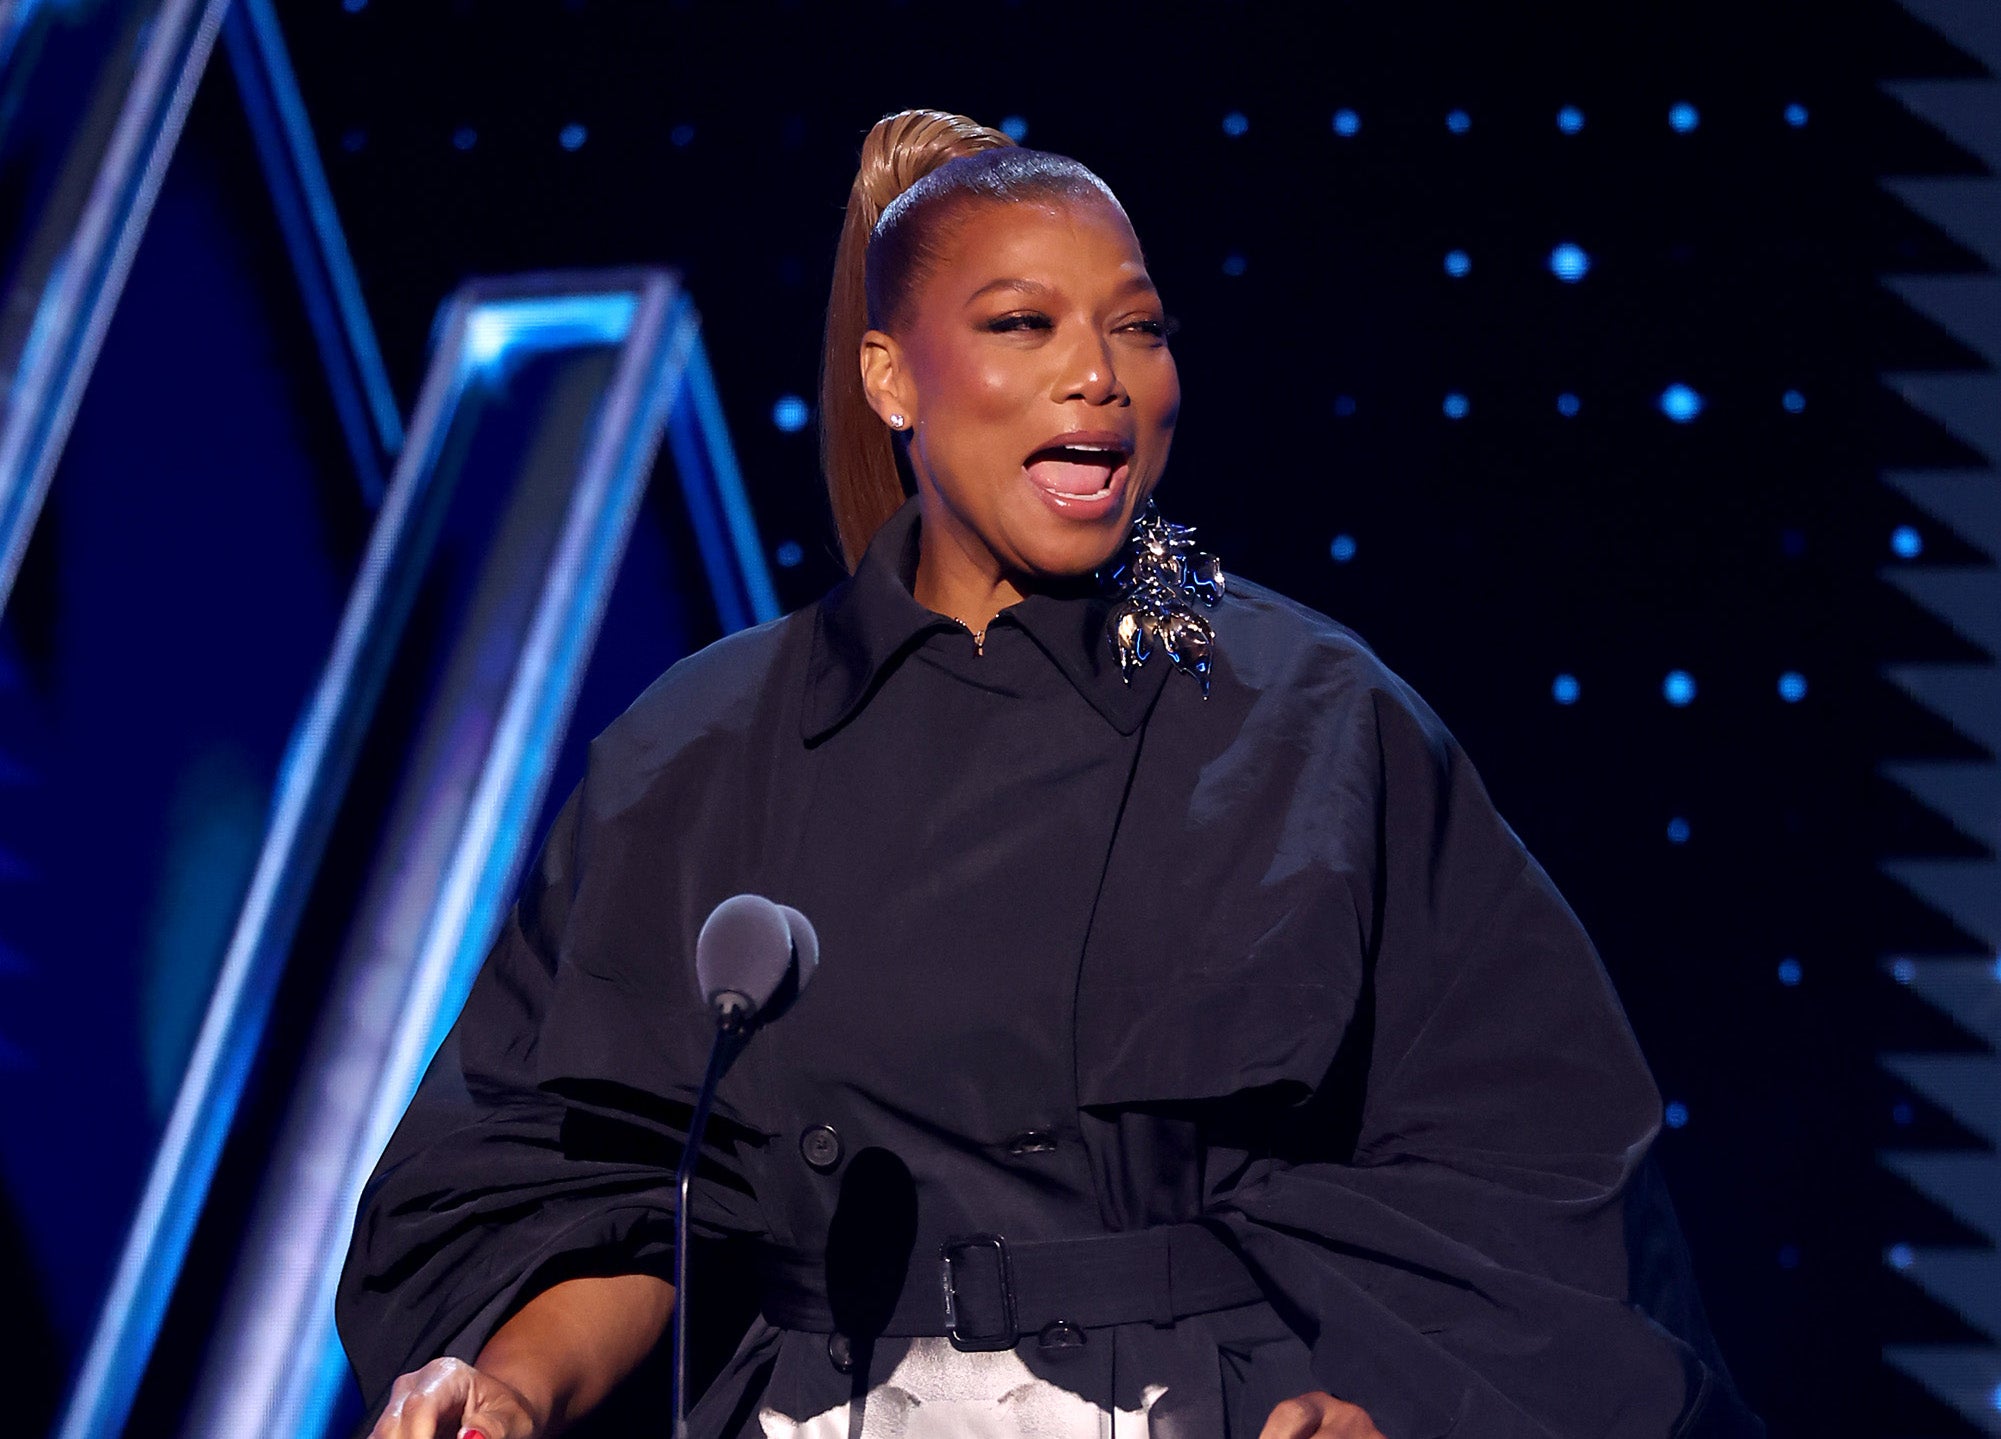 Queen Latifah on Returning To Host This Year’s NAACP Image Awards: ‘I Want To Deliver For My People’